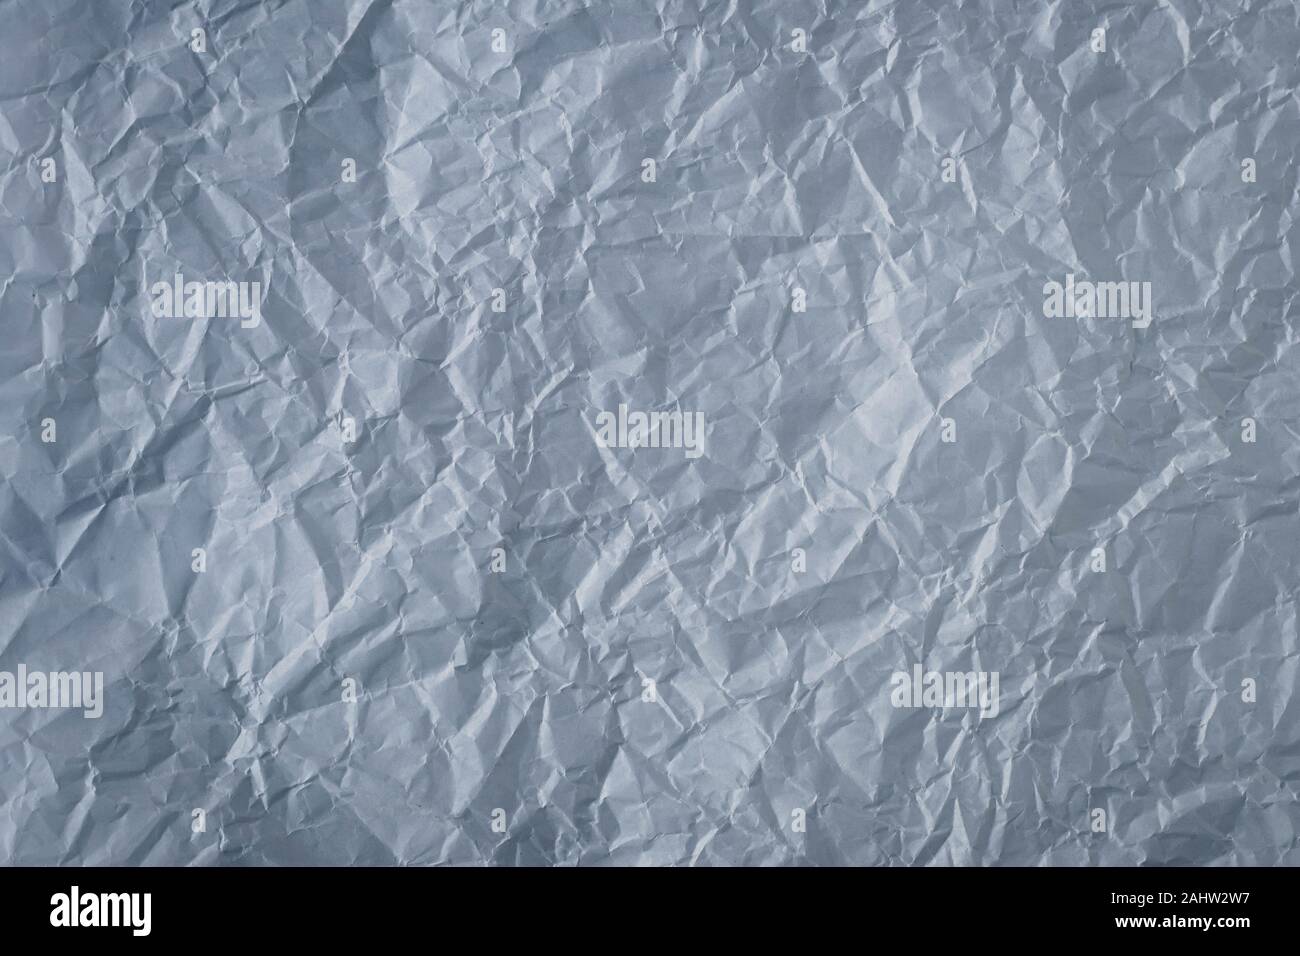 Crumpled gray paper background. Textured effect. Messy wrinkled parchment. Dark grey sheet texture Stock Photo